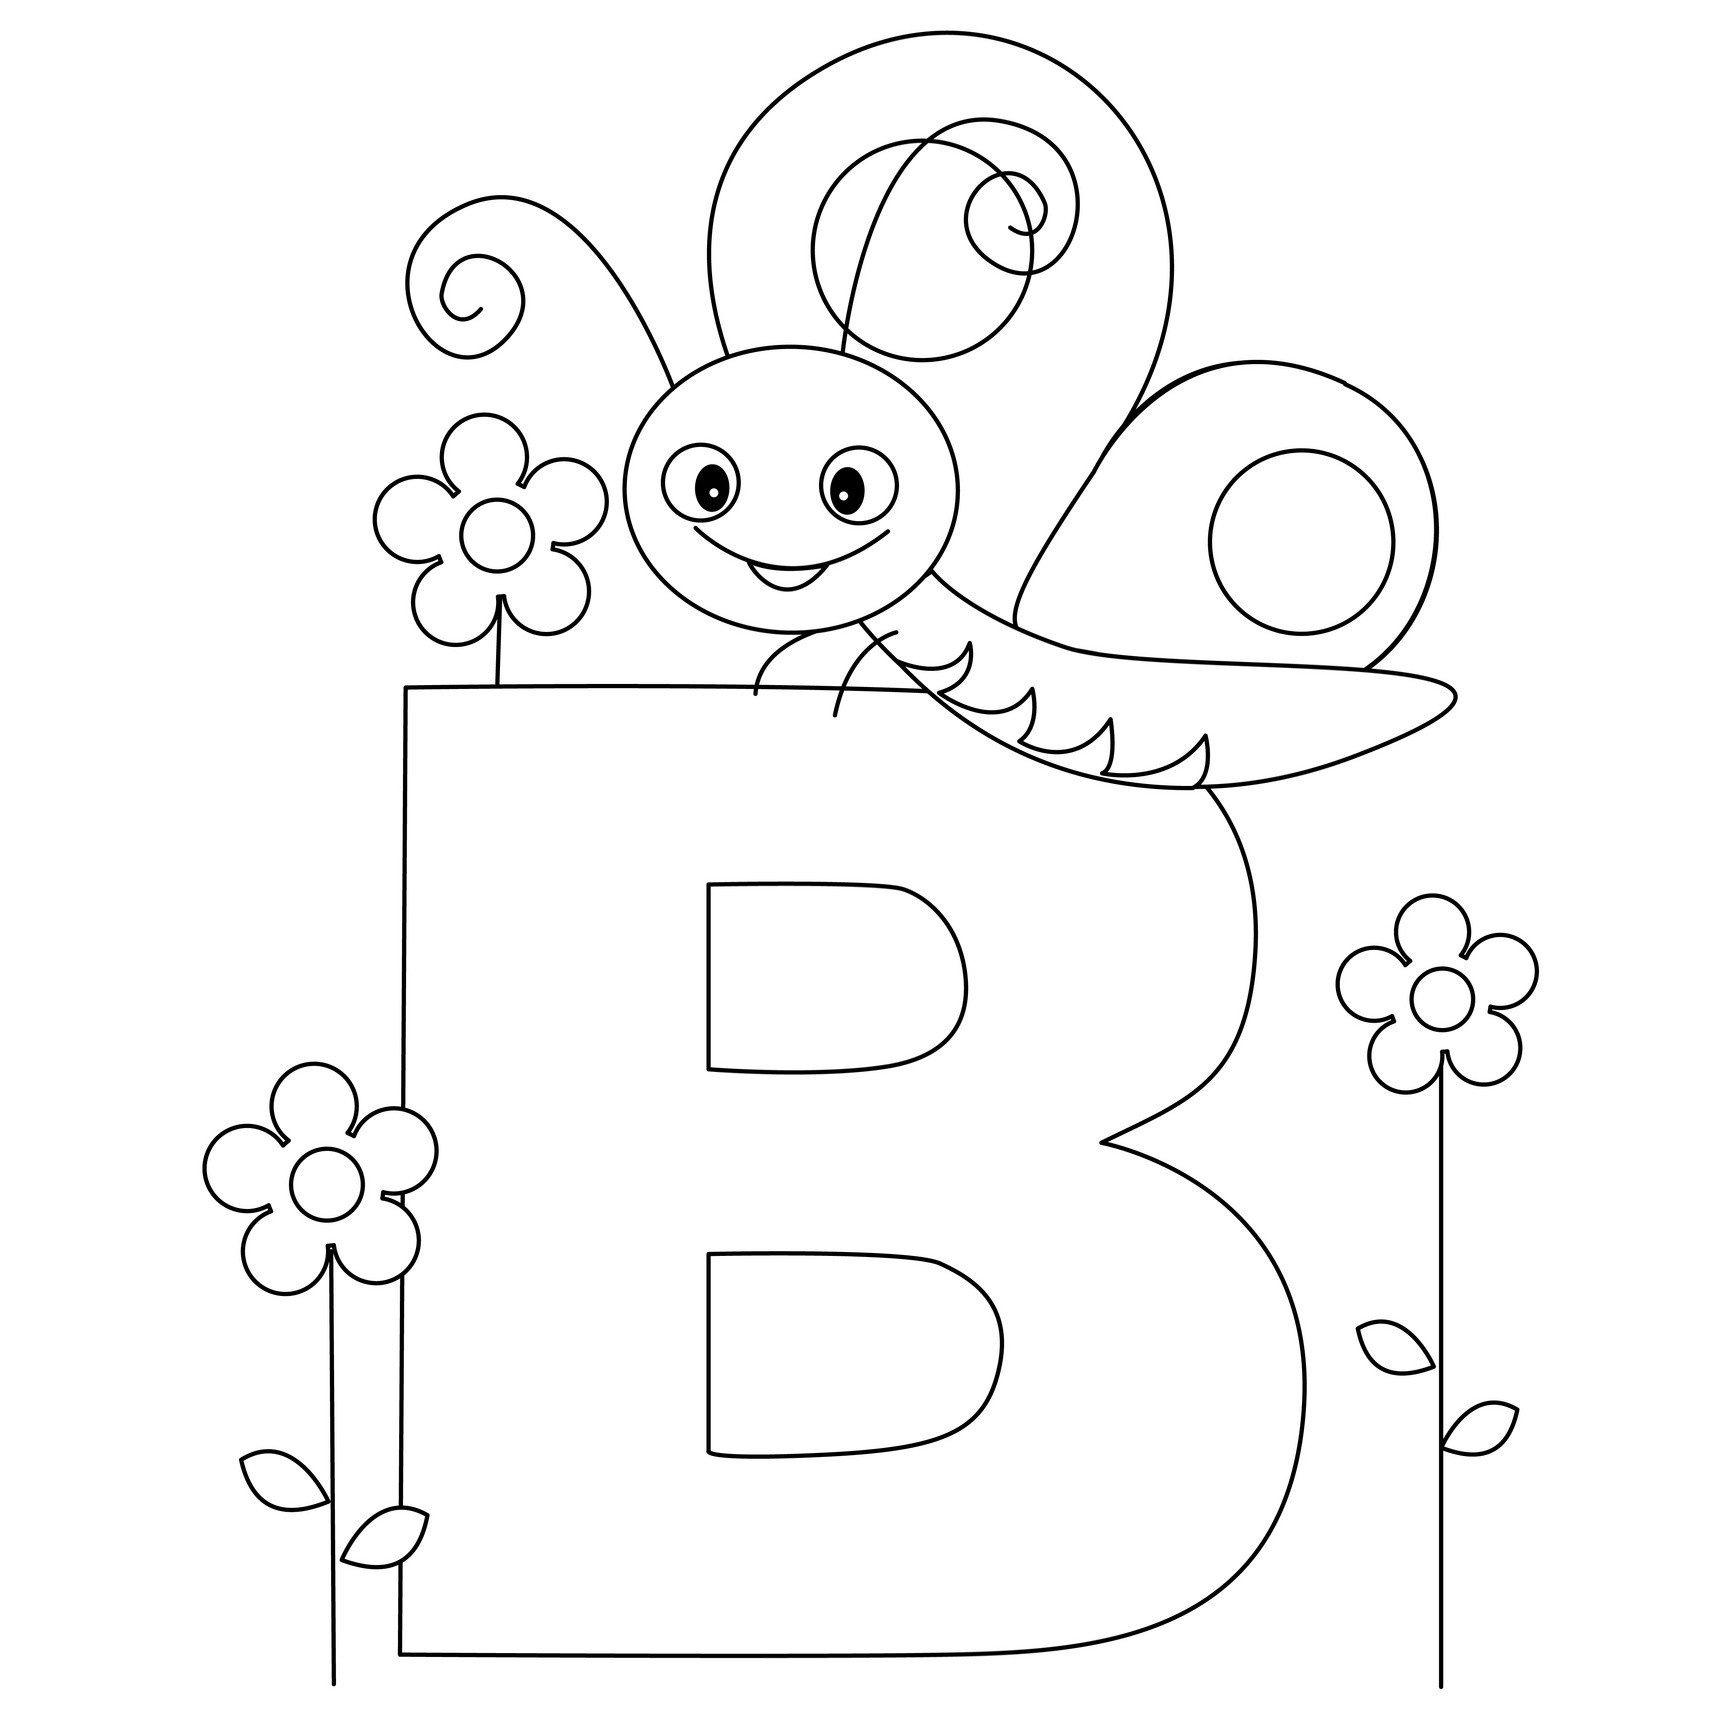 Alphabet Printable Coloring Pages | Presidencycollegekolkata - Free Printable Preschool Alphabet Coloring Pages